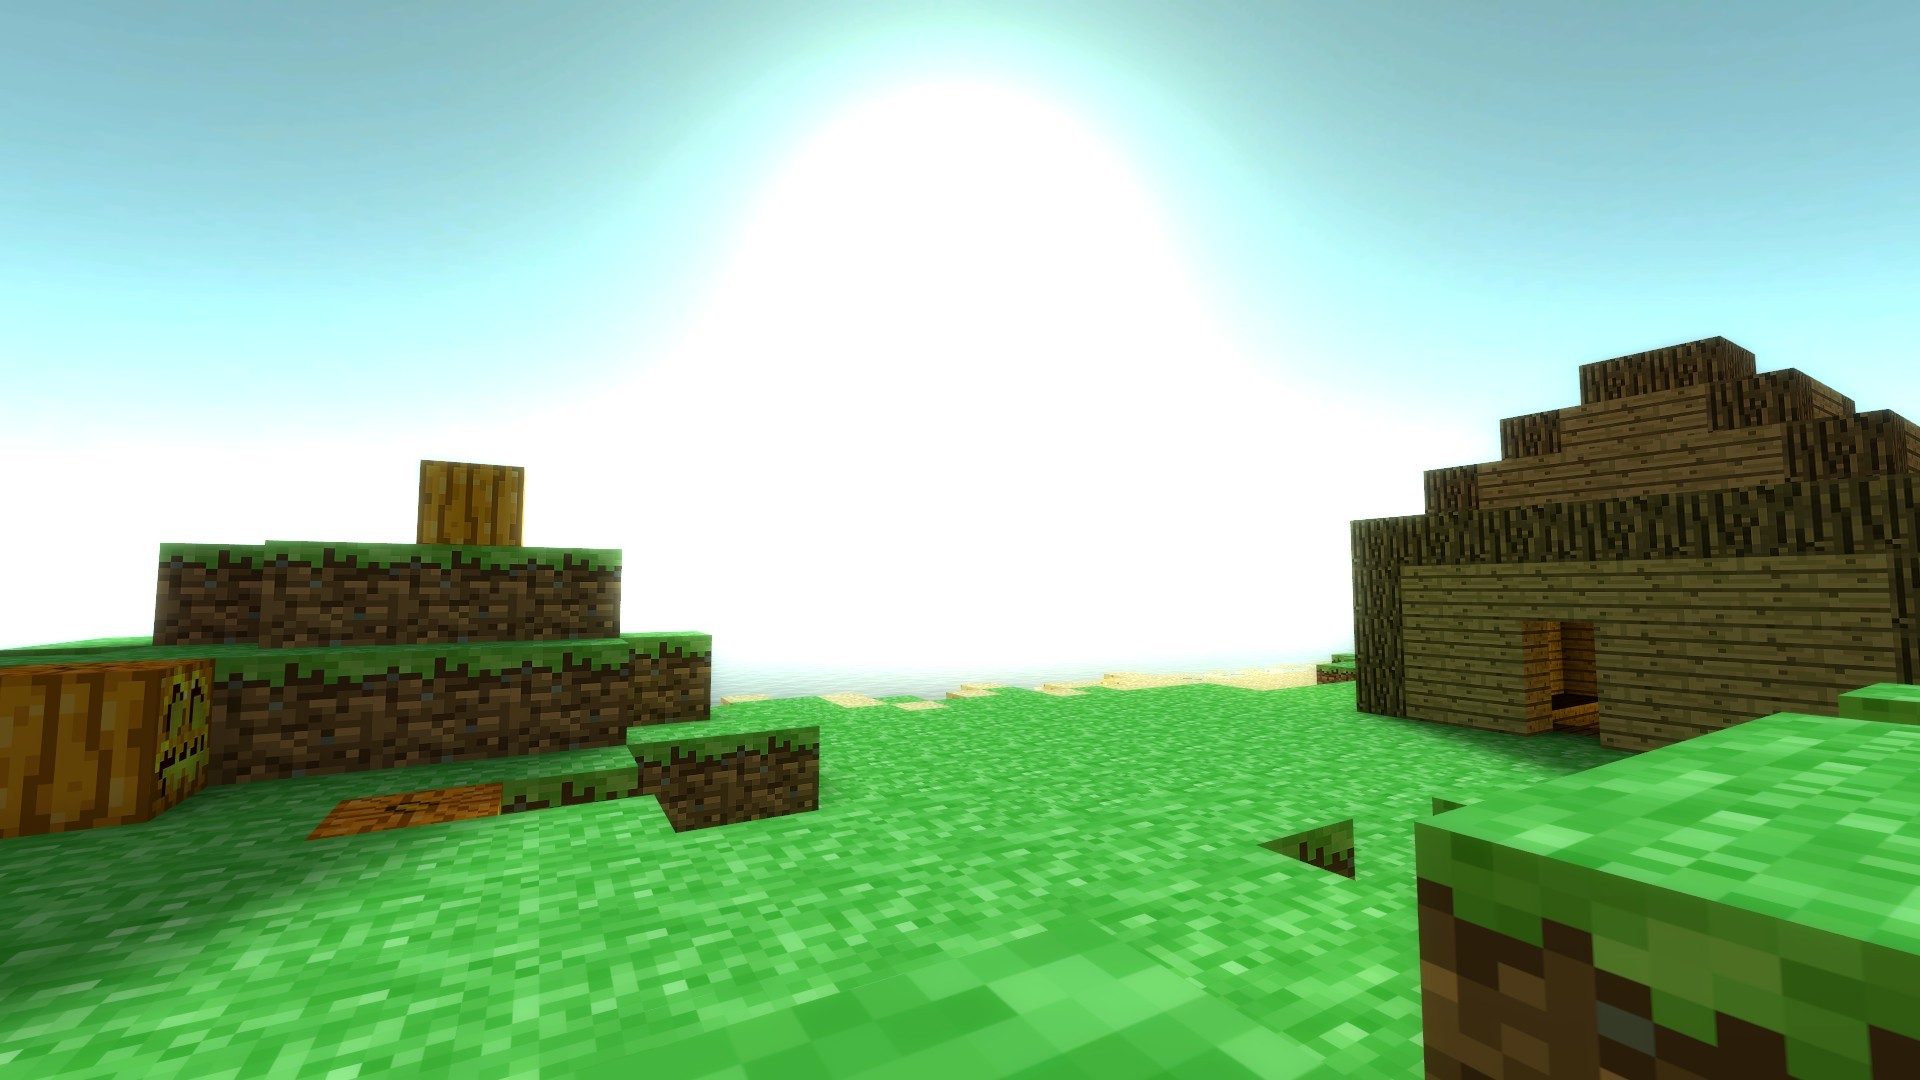 1920x1080 ... Download Minecraft Background Images HD Wallpaper of Minecraft .